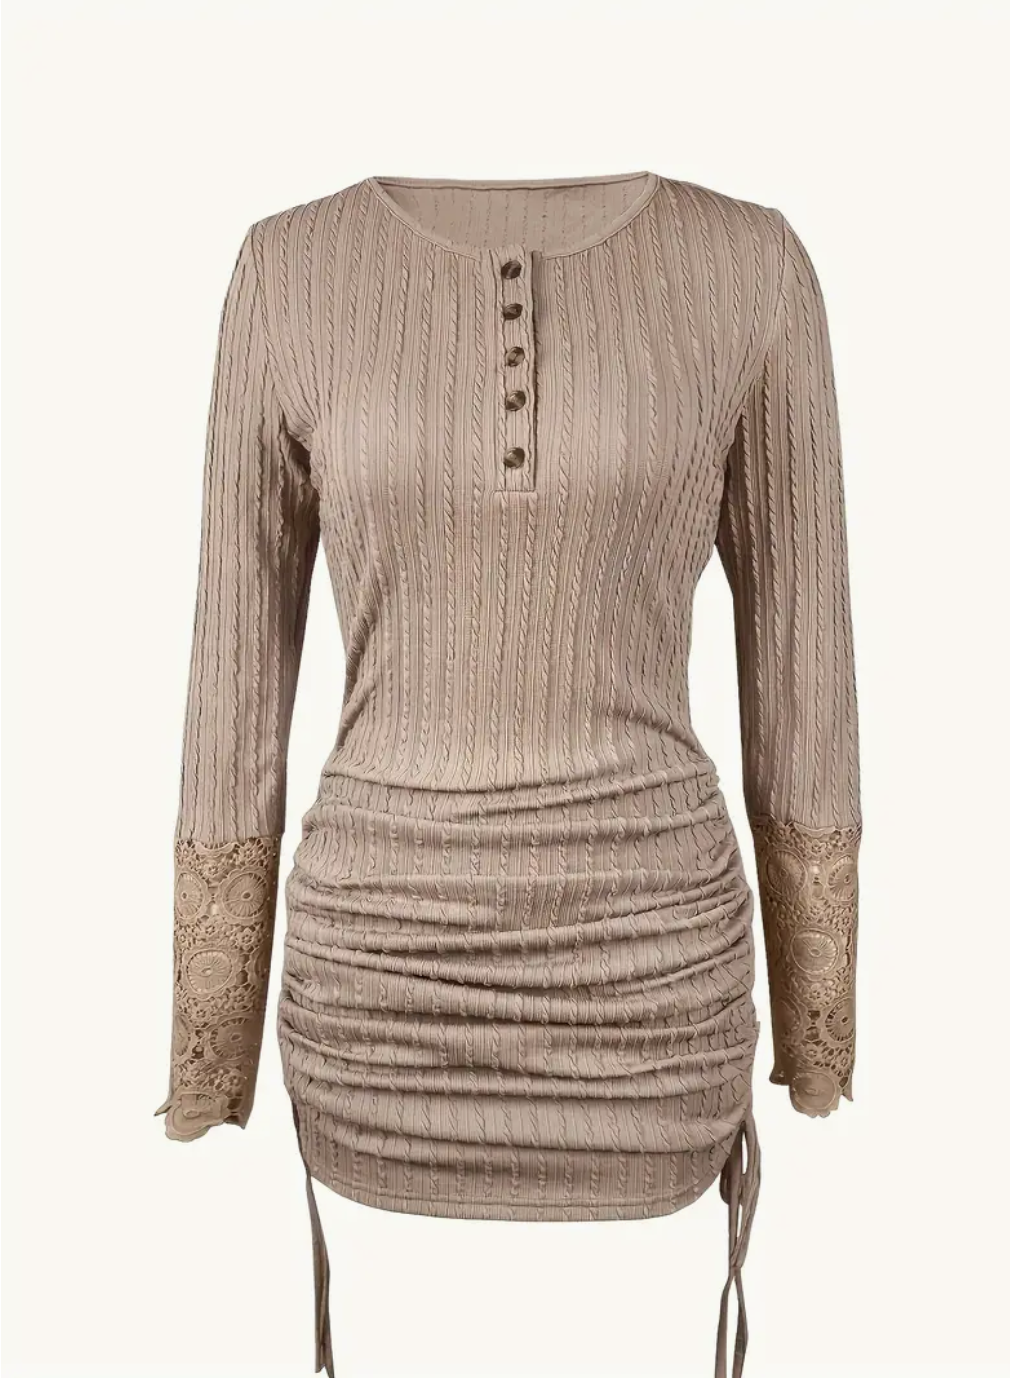 Lace Elegance: Contrast Lace Ruched Dress - Unleash Your Sophistication with the Elegant Drawstring Button Front!